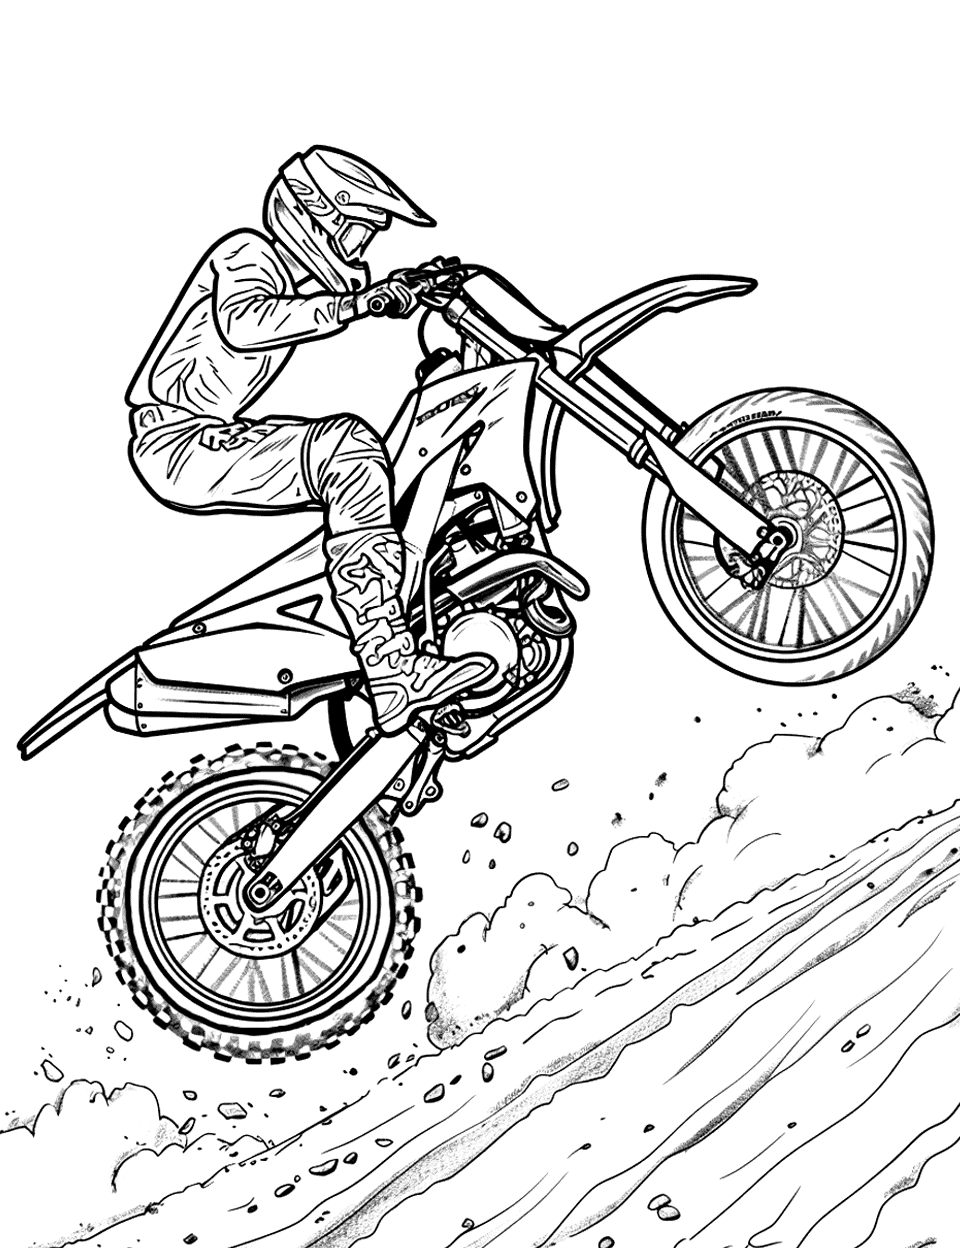 Motocross Jump Motorcycle Coloring Page - A motocross rider in mid-air over a large dirt jump, with a cloud of dust behind.